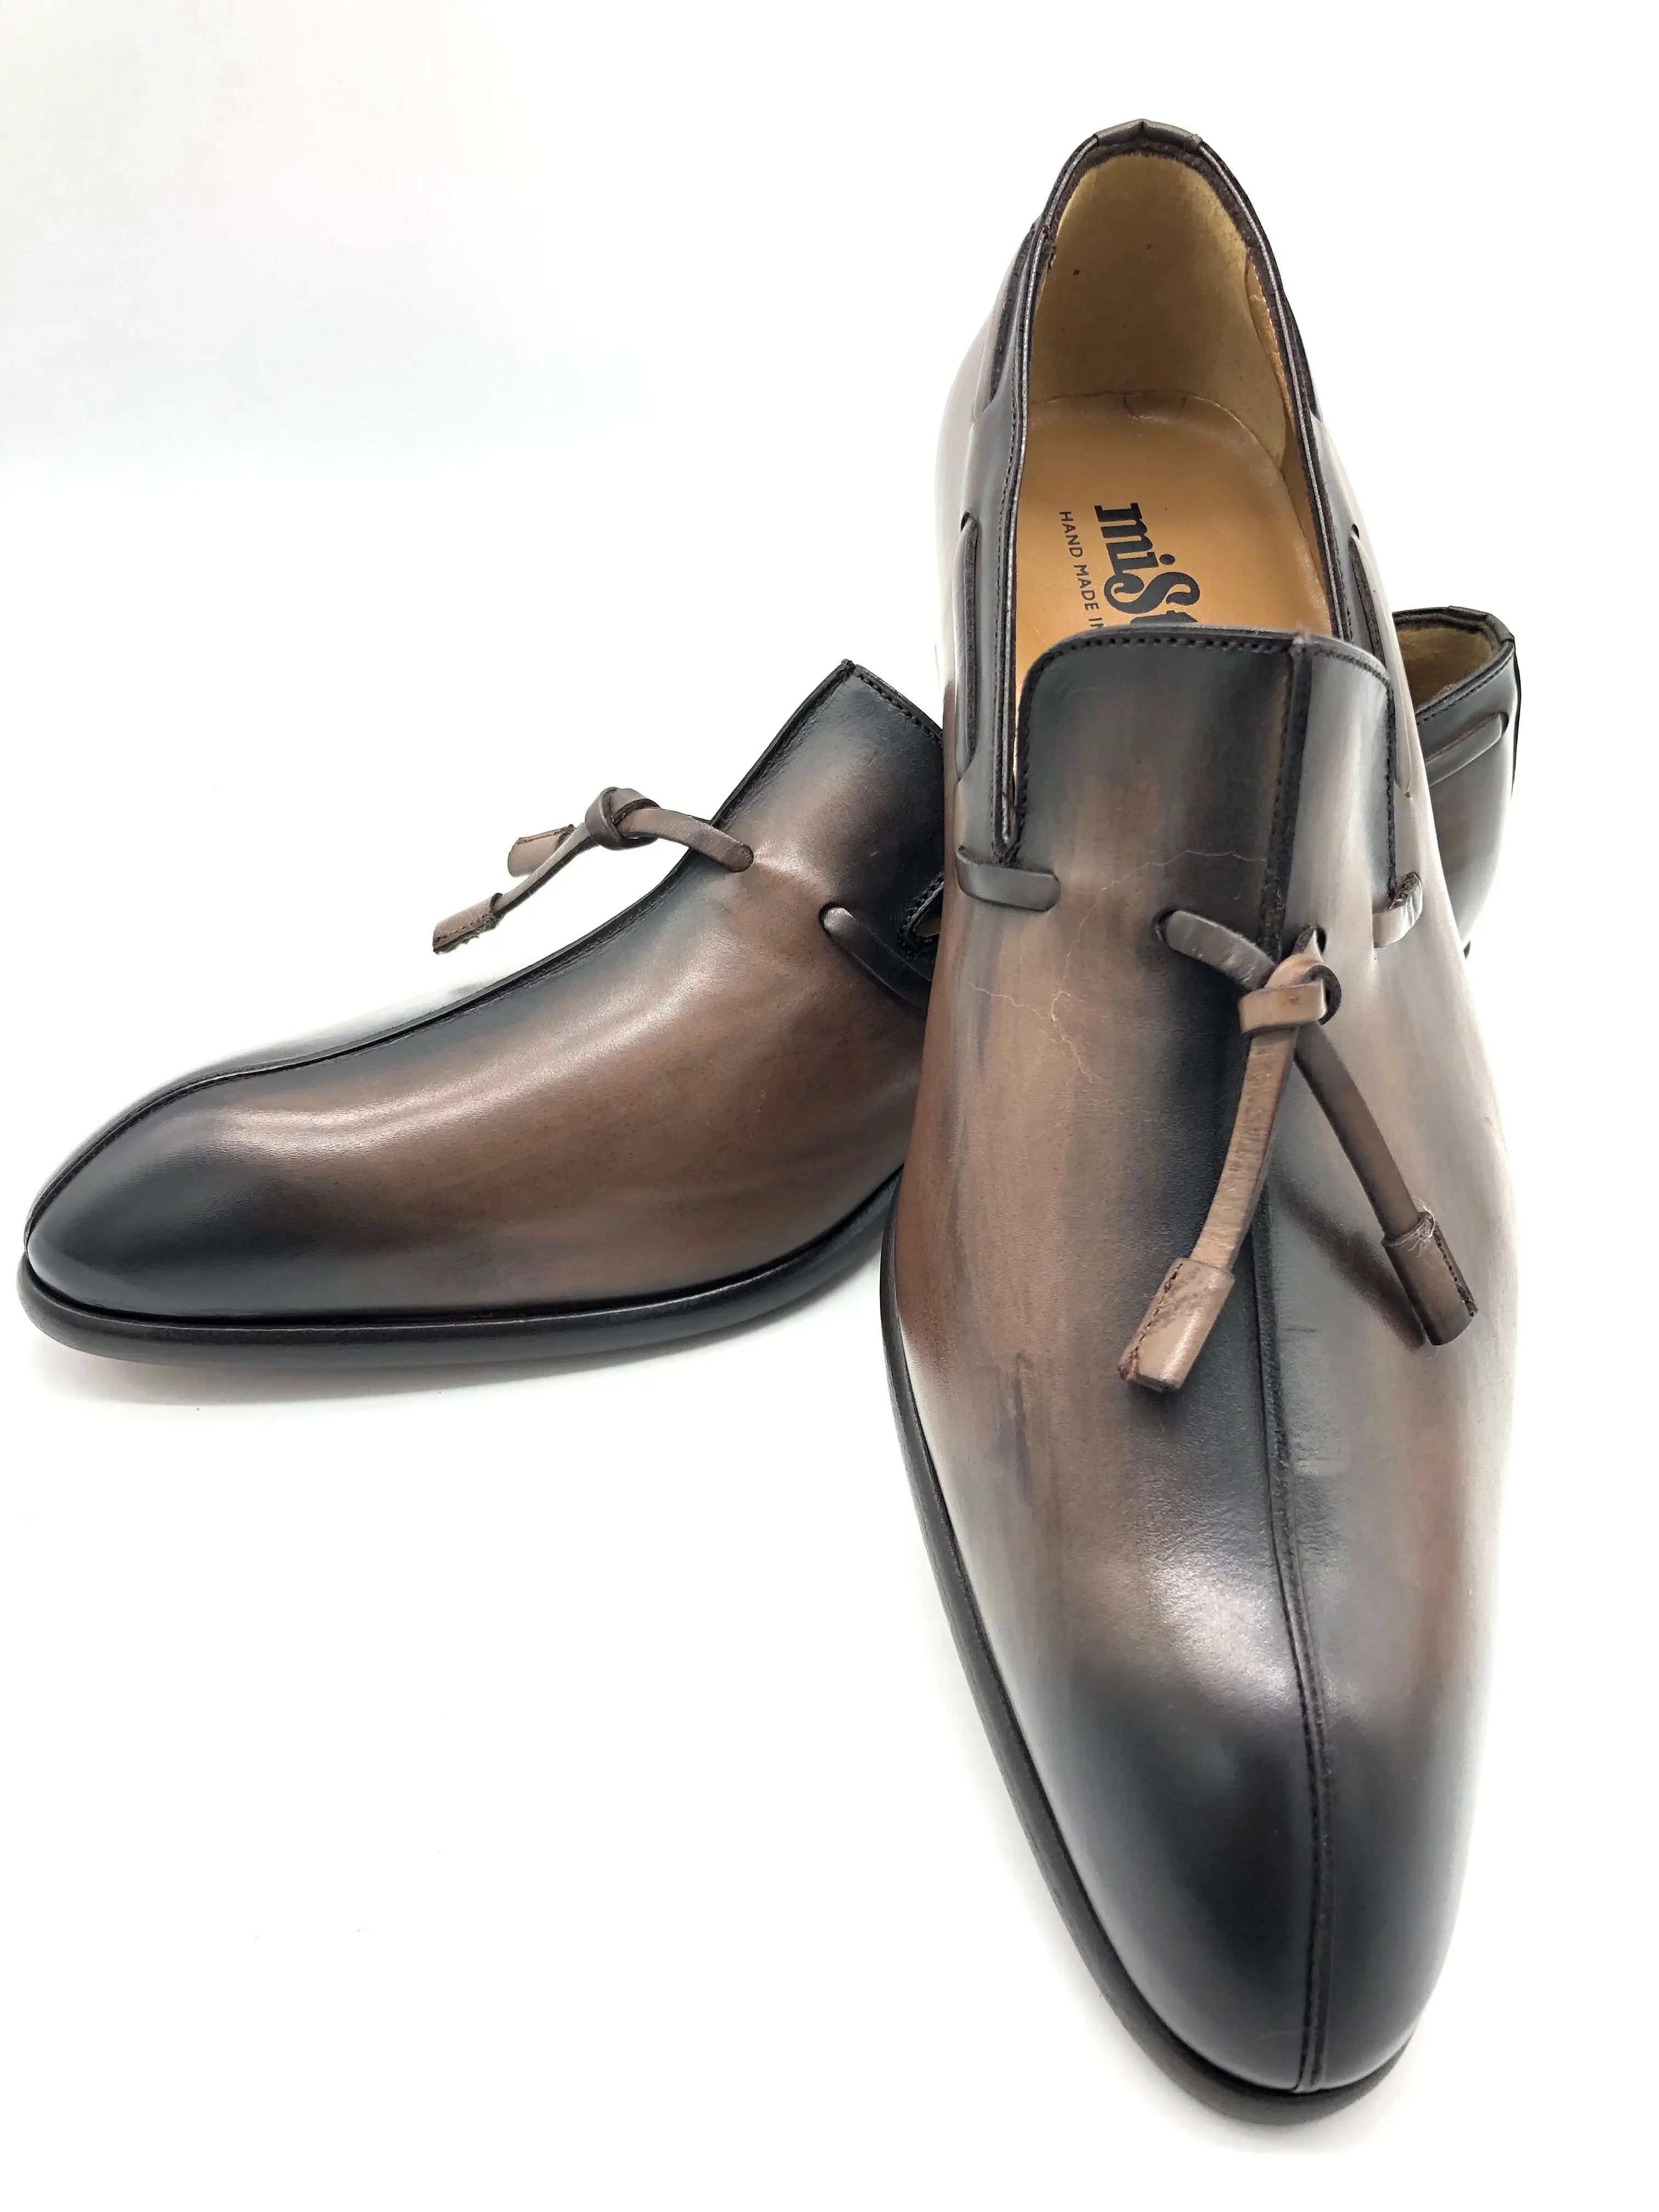 MISTER 37543 BROWN Loafers | familyshoecentre